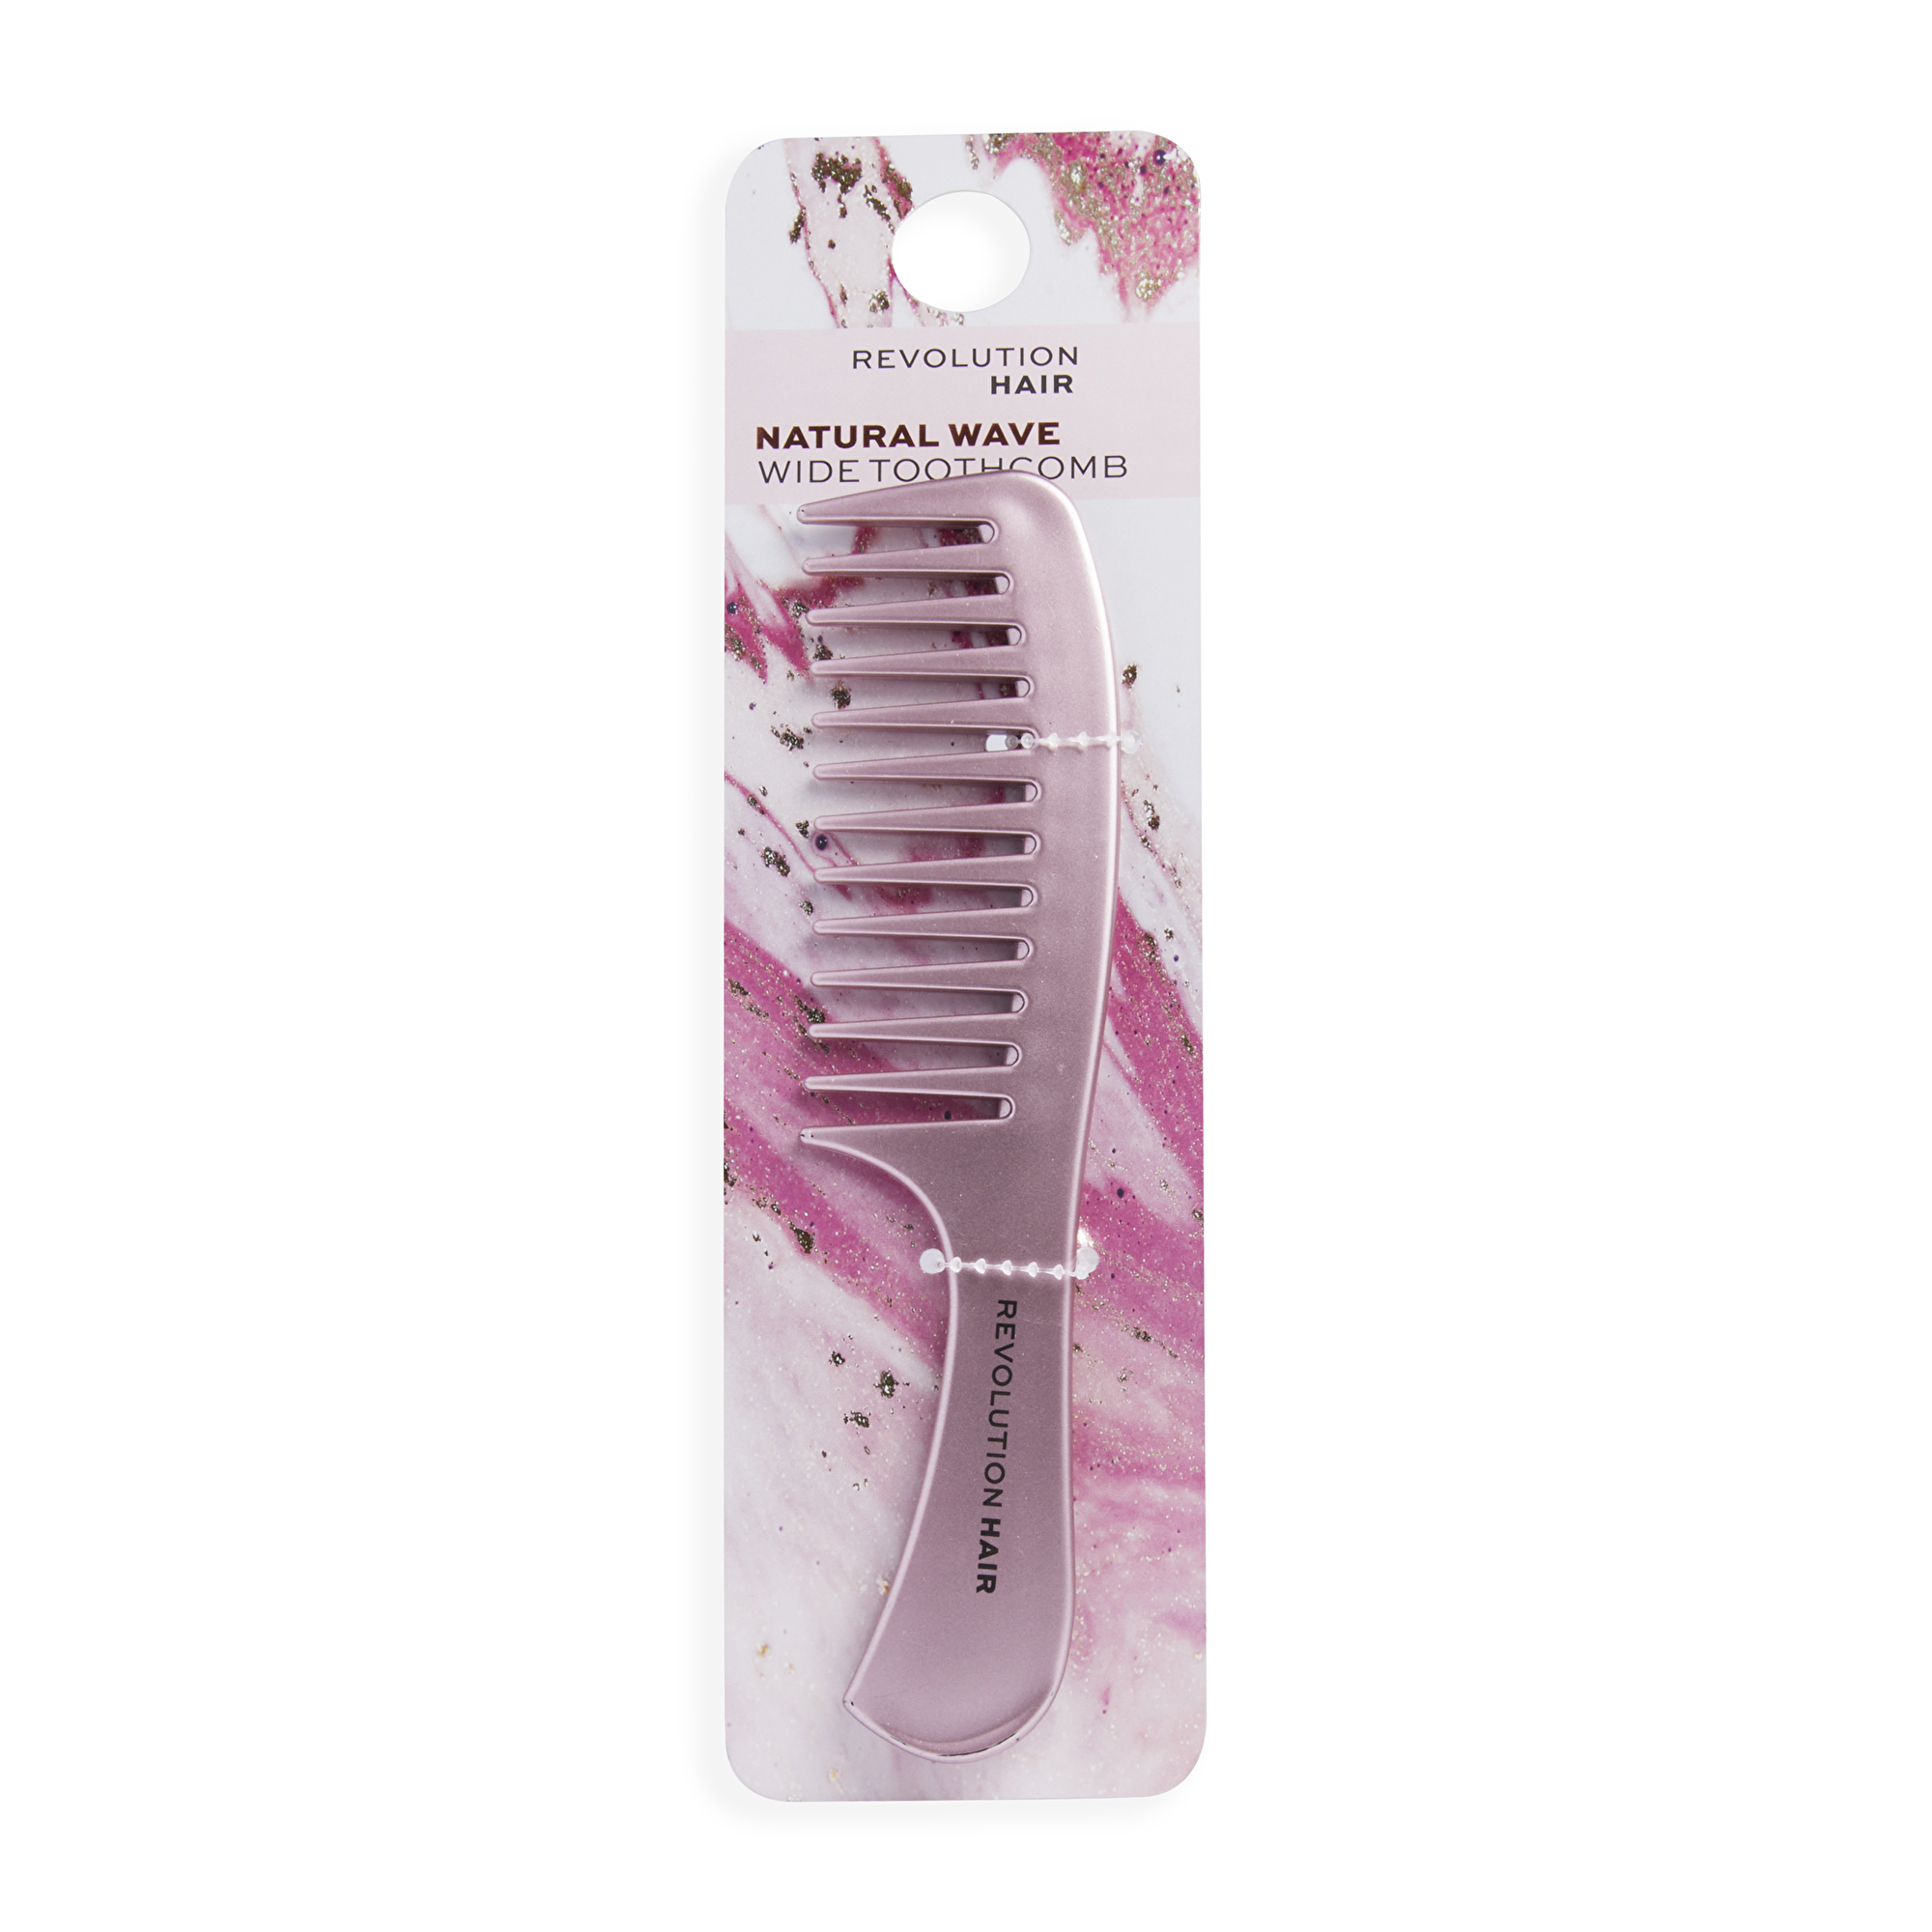 Revolution Haircare Hřeben Natural Wave Wide (Toothcomb)